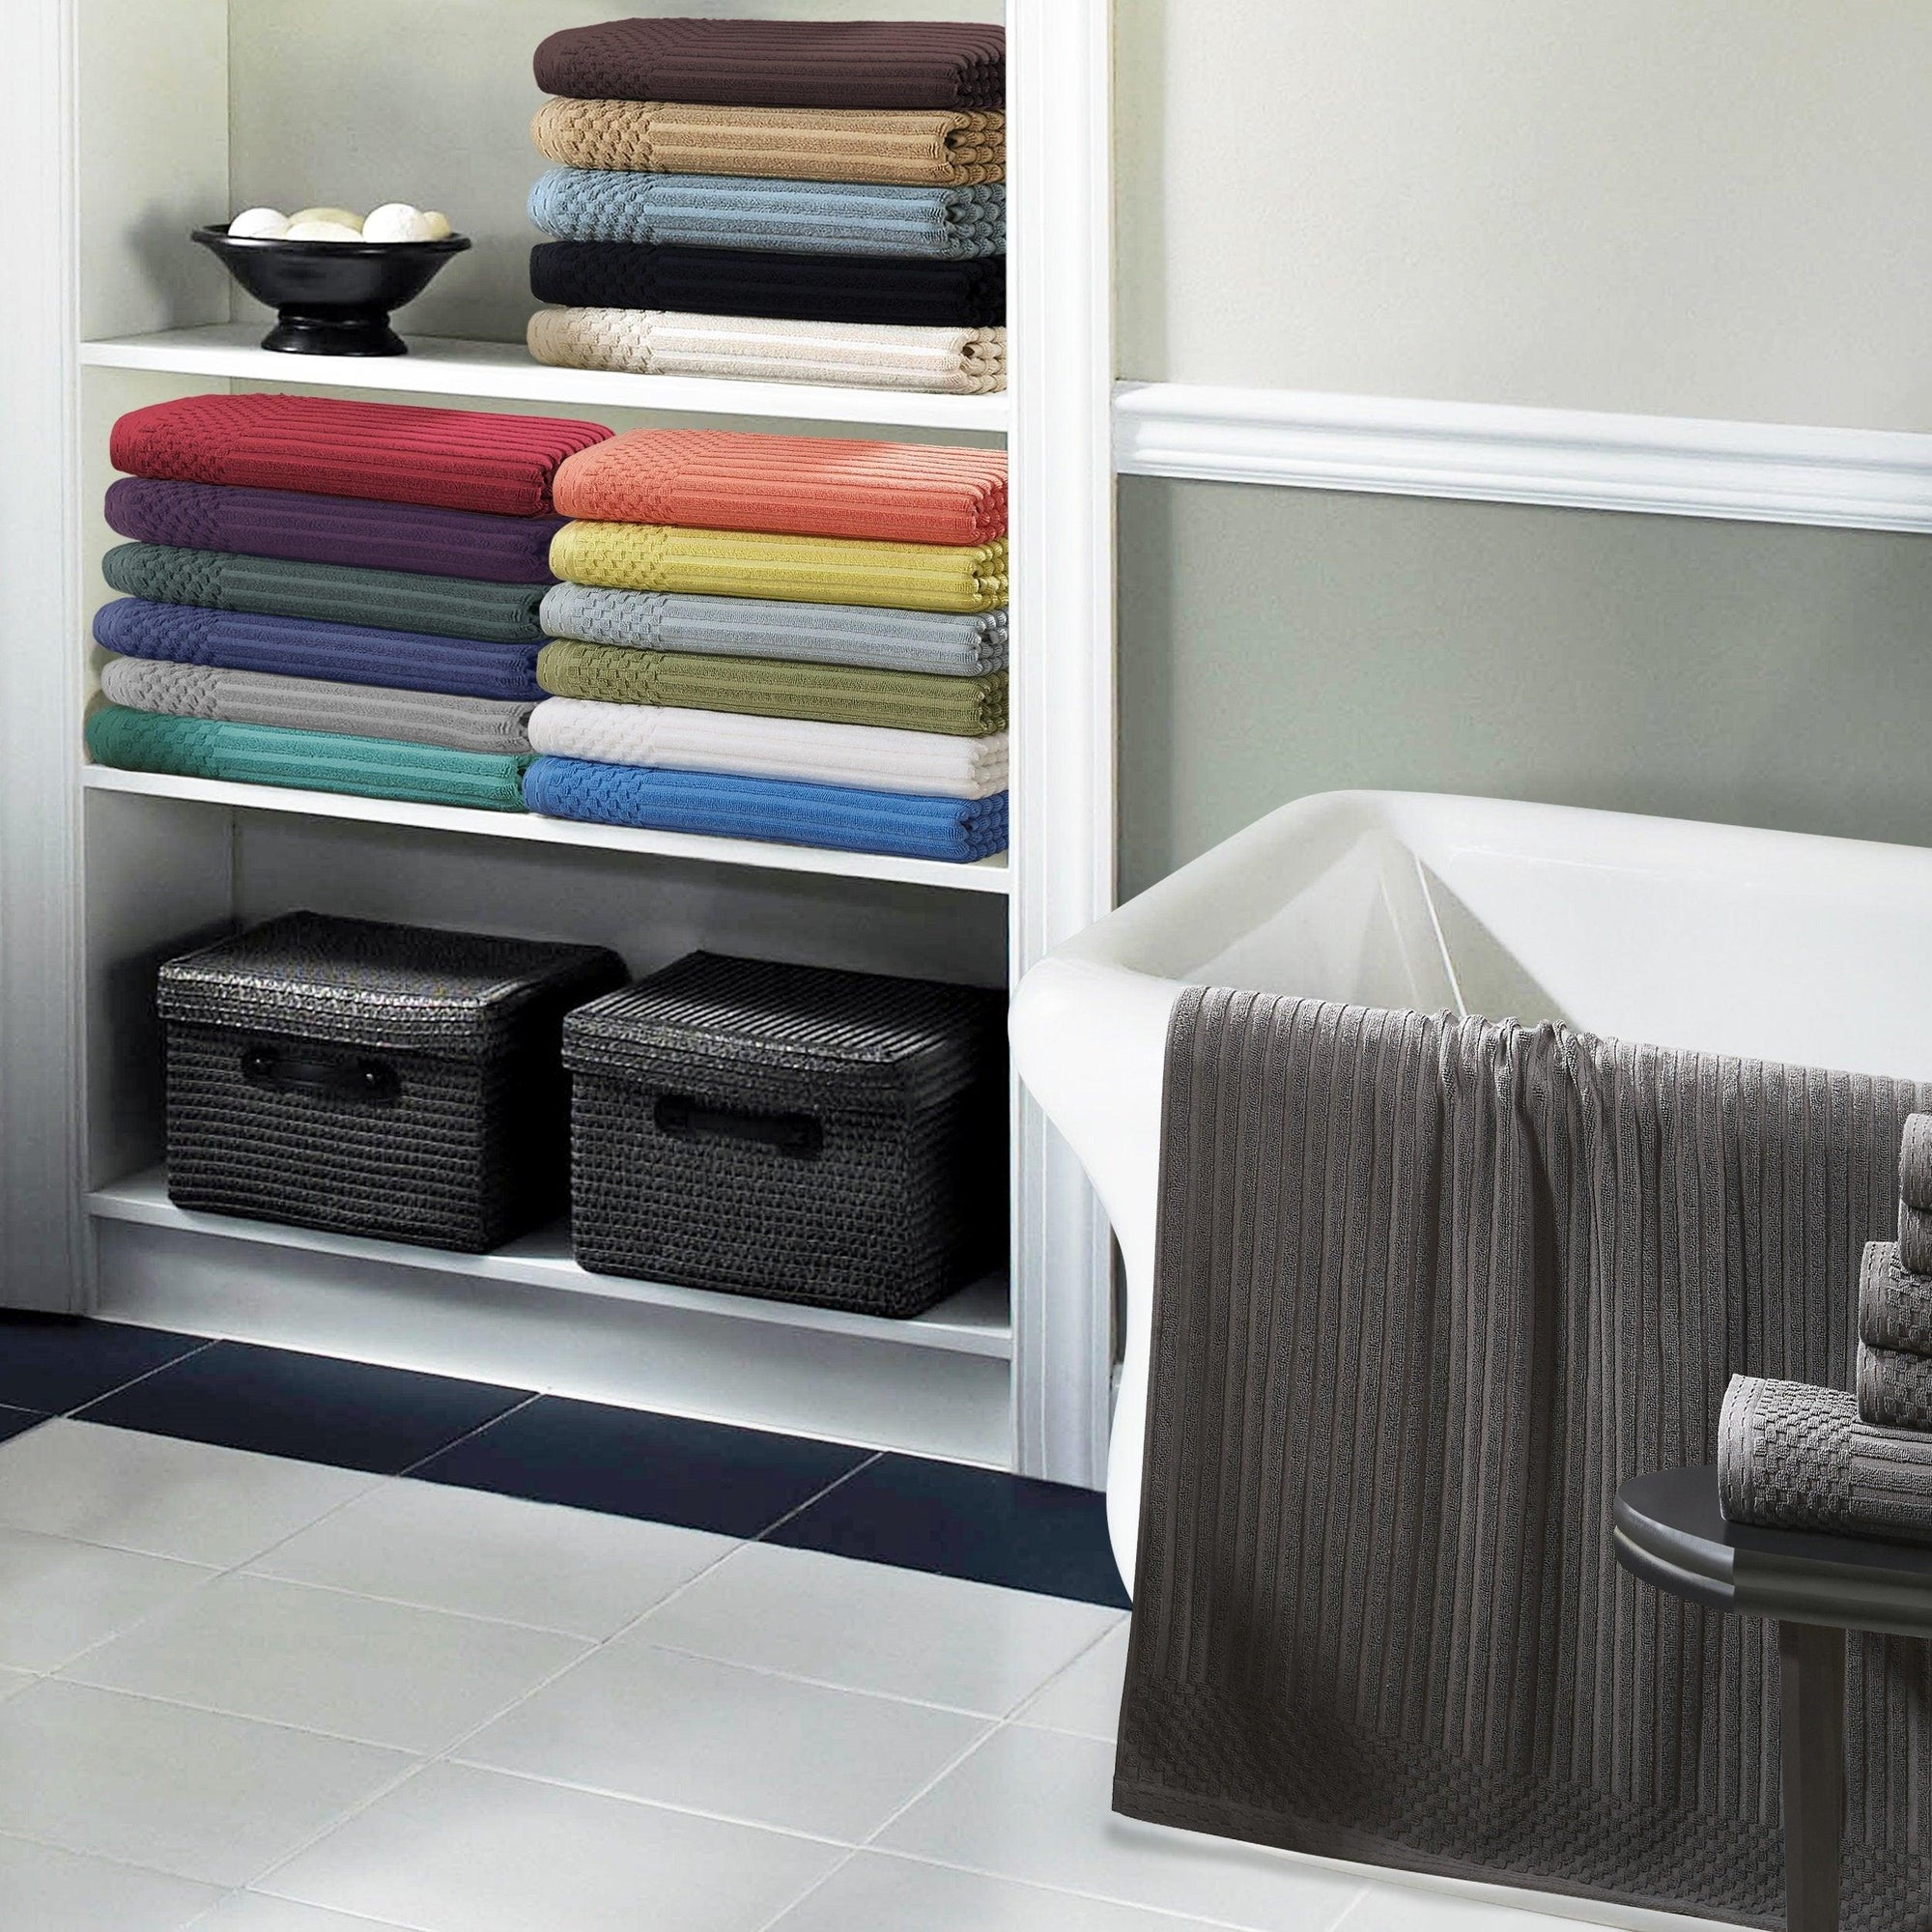 Everything You Need to Know About Microfiber Towels Including Care, Tips, and More - Home City Inc